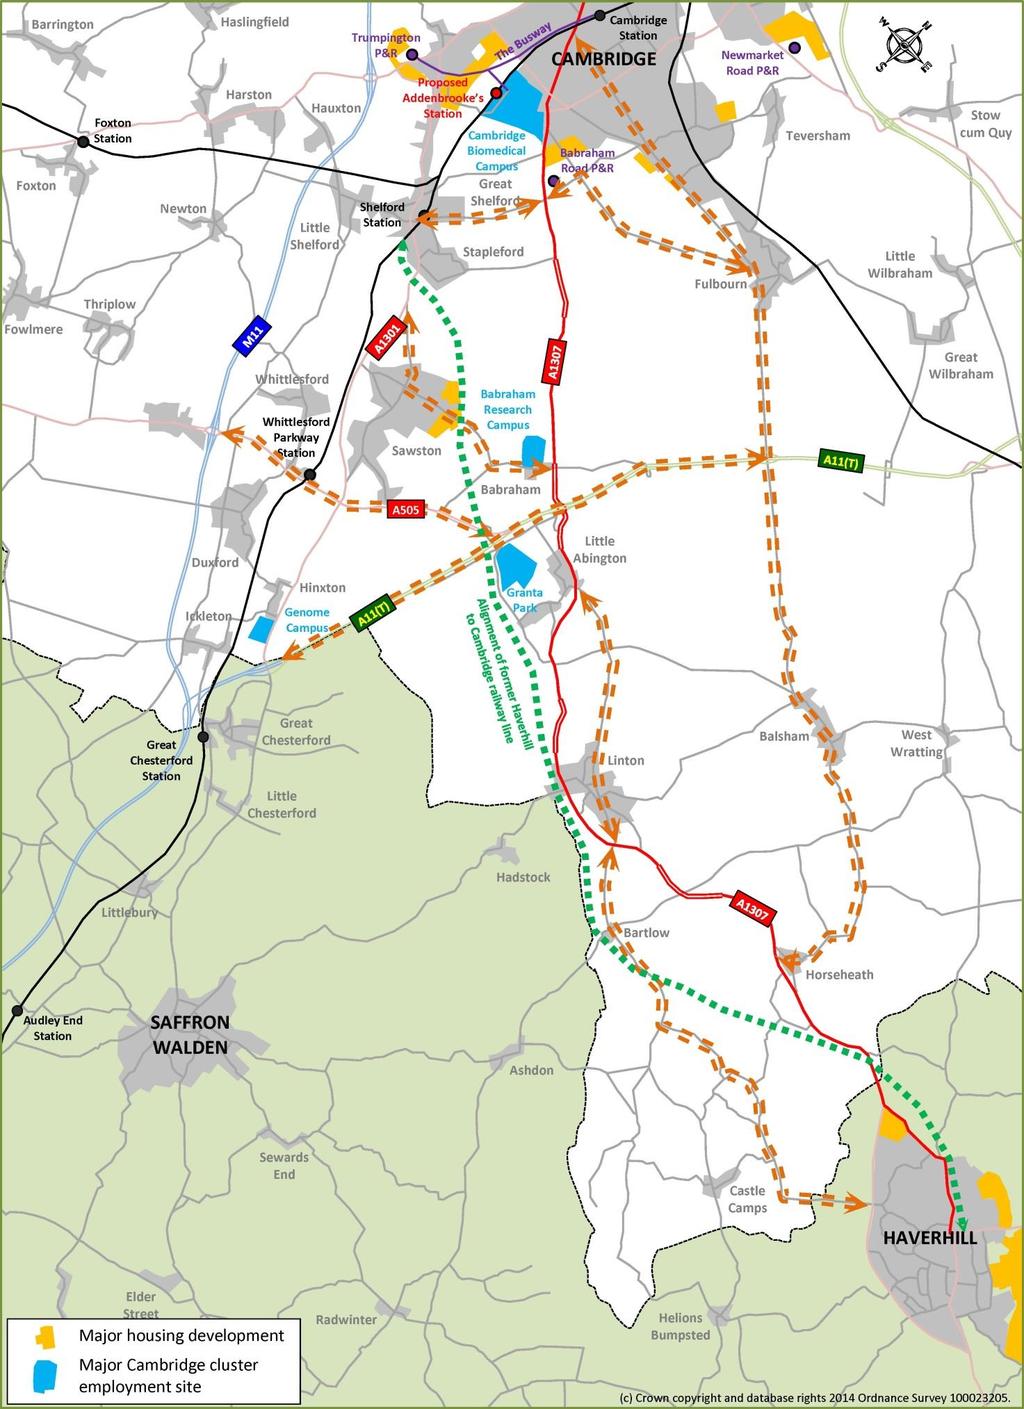 Figure 1 The Haverhill to Cambridge Corridor The A1307 is shown in red and various routes that interact with it for trips into Cambridge and to major employment sites on the corridor shown in orange.